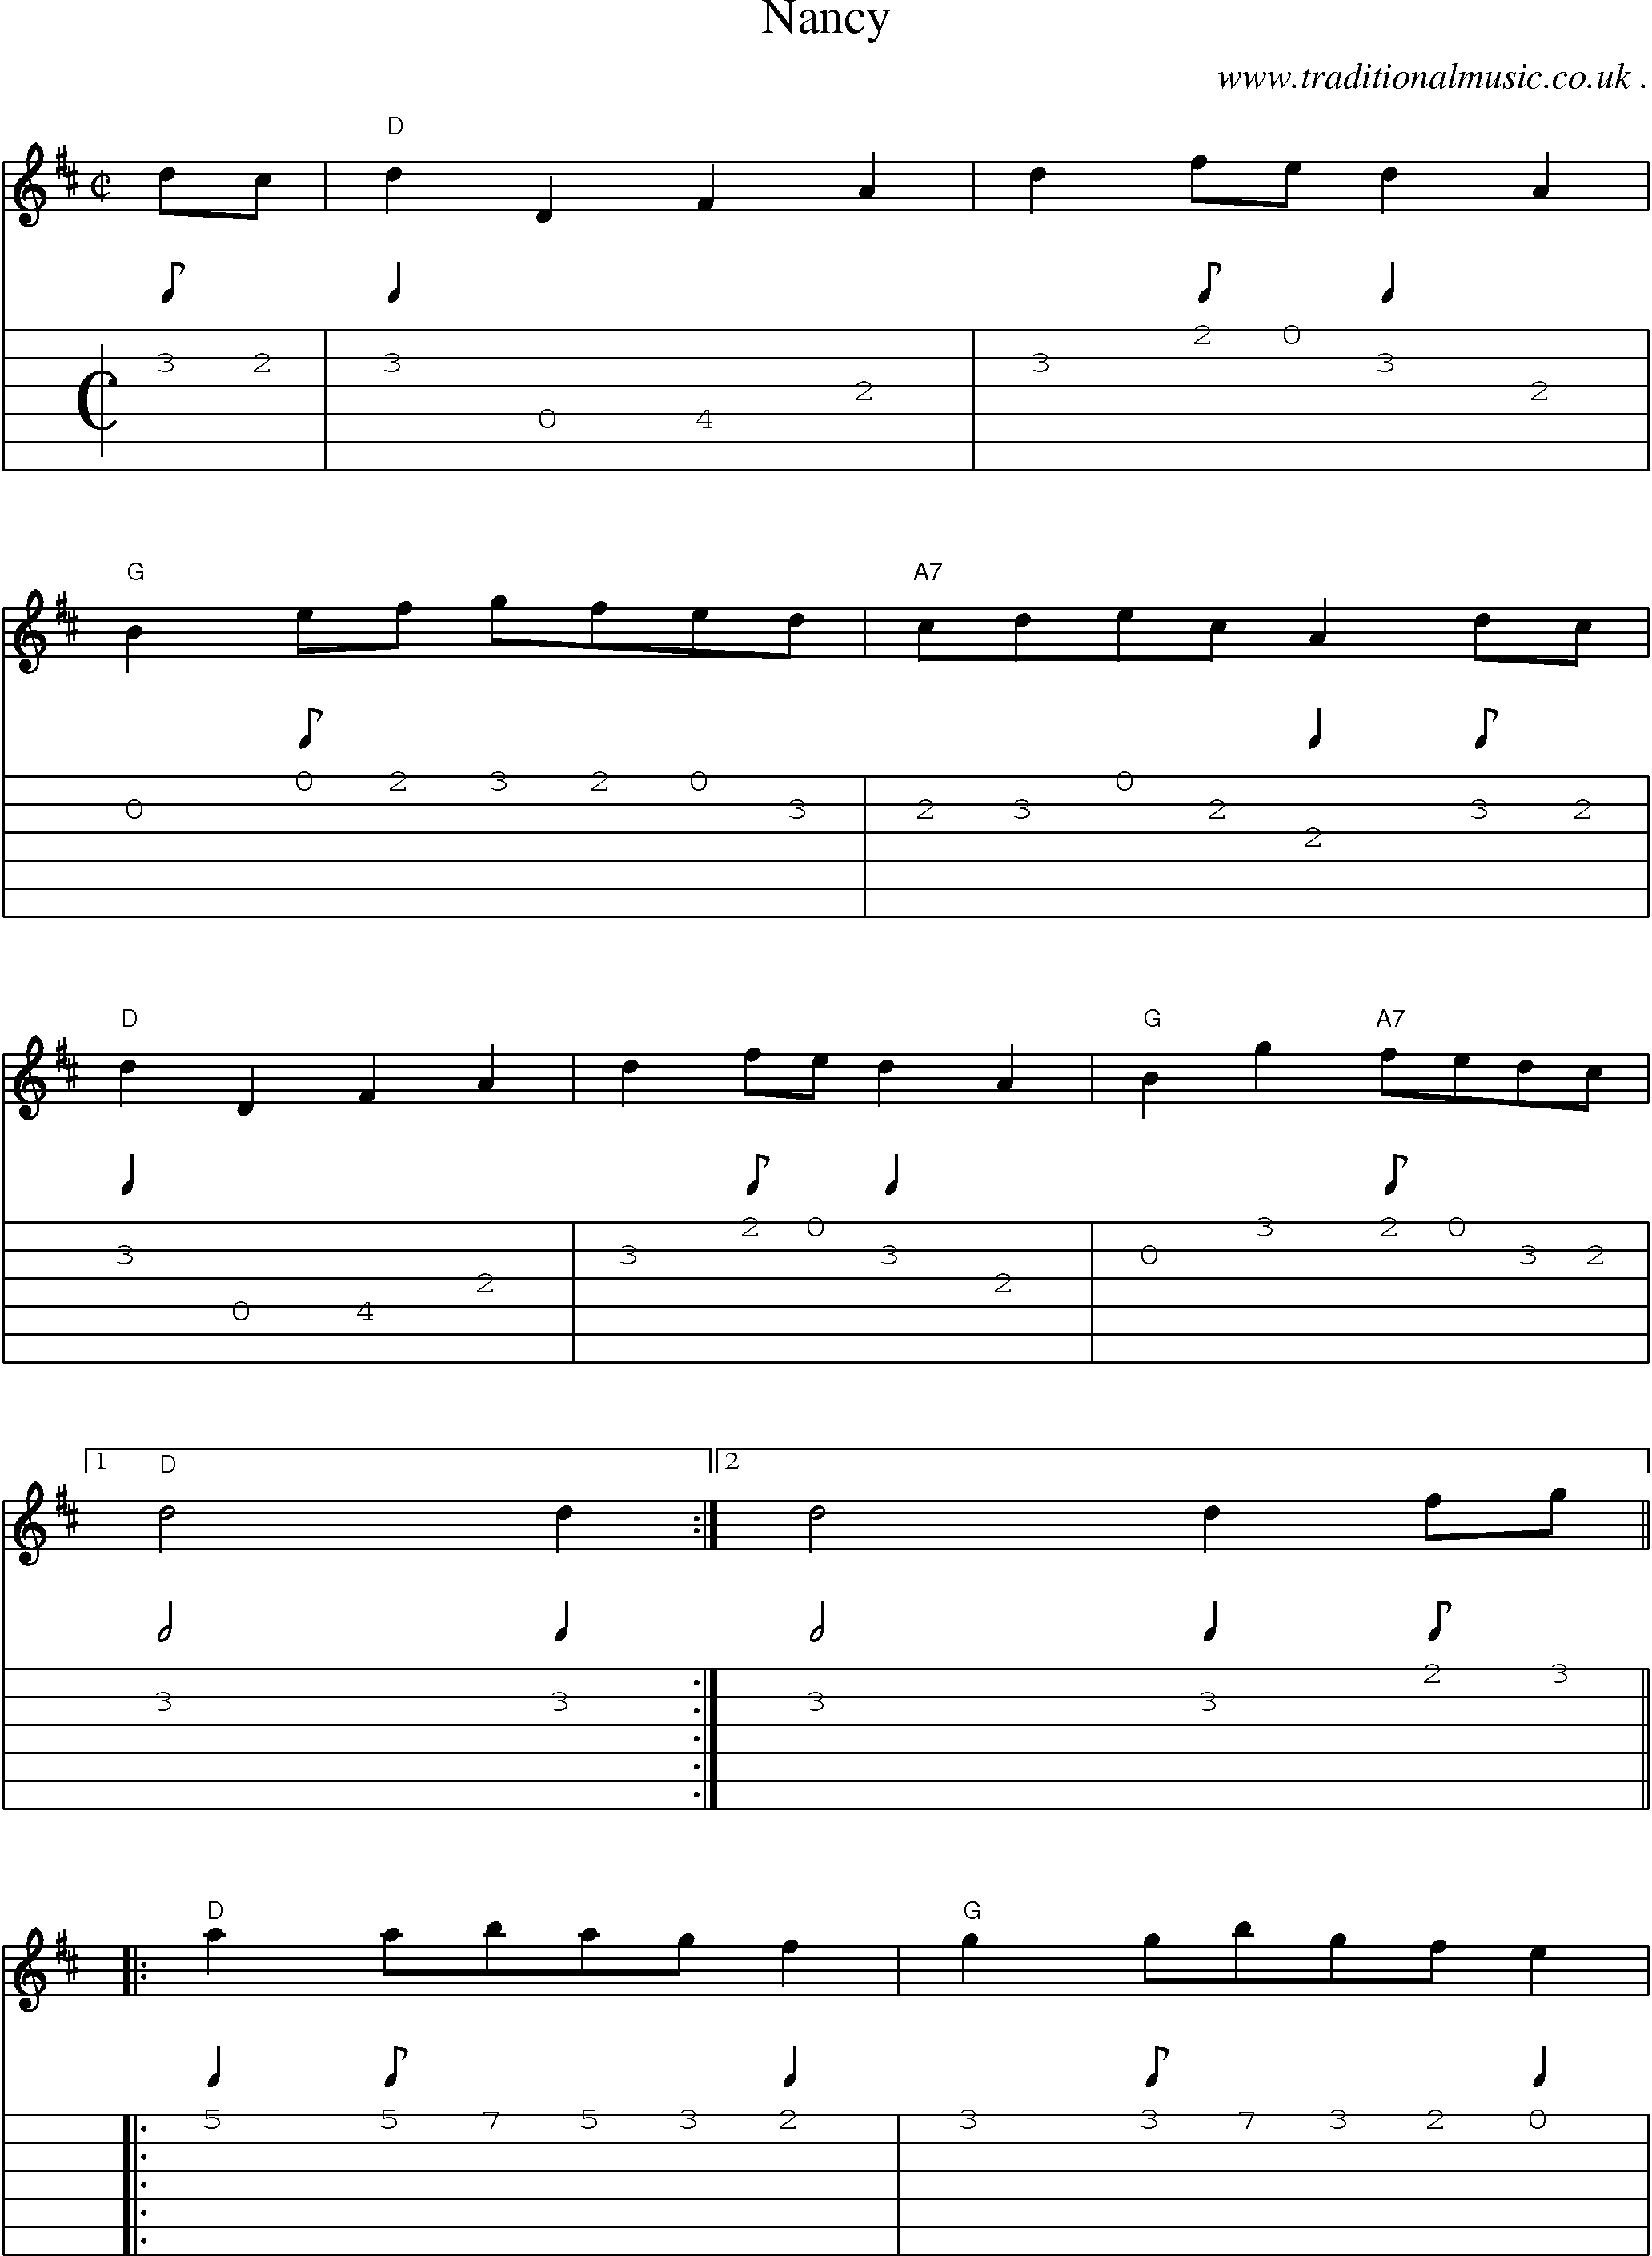 Music Score and Guitar Tabs for Nancy